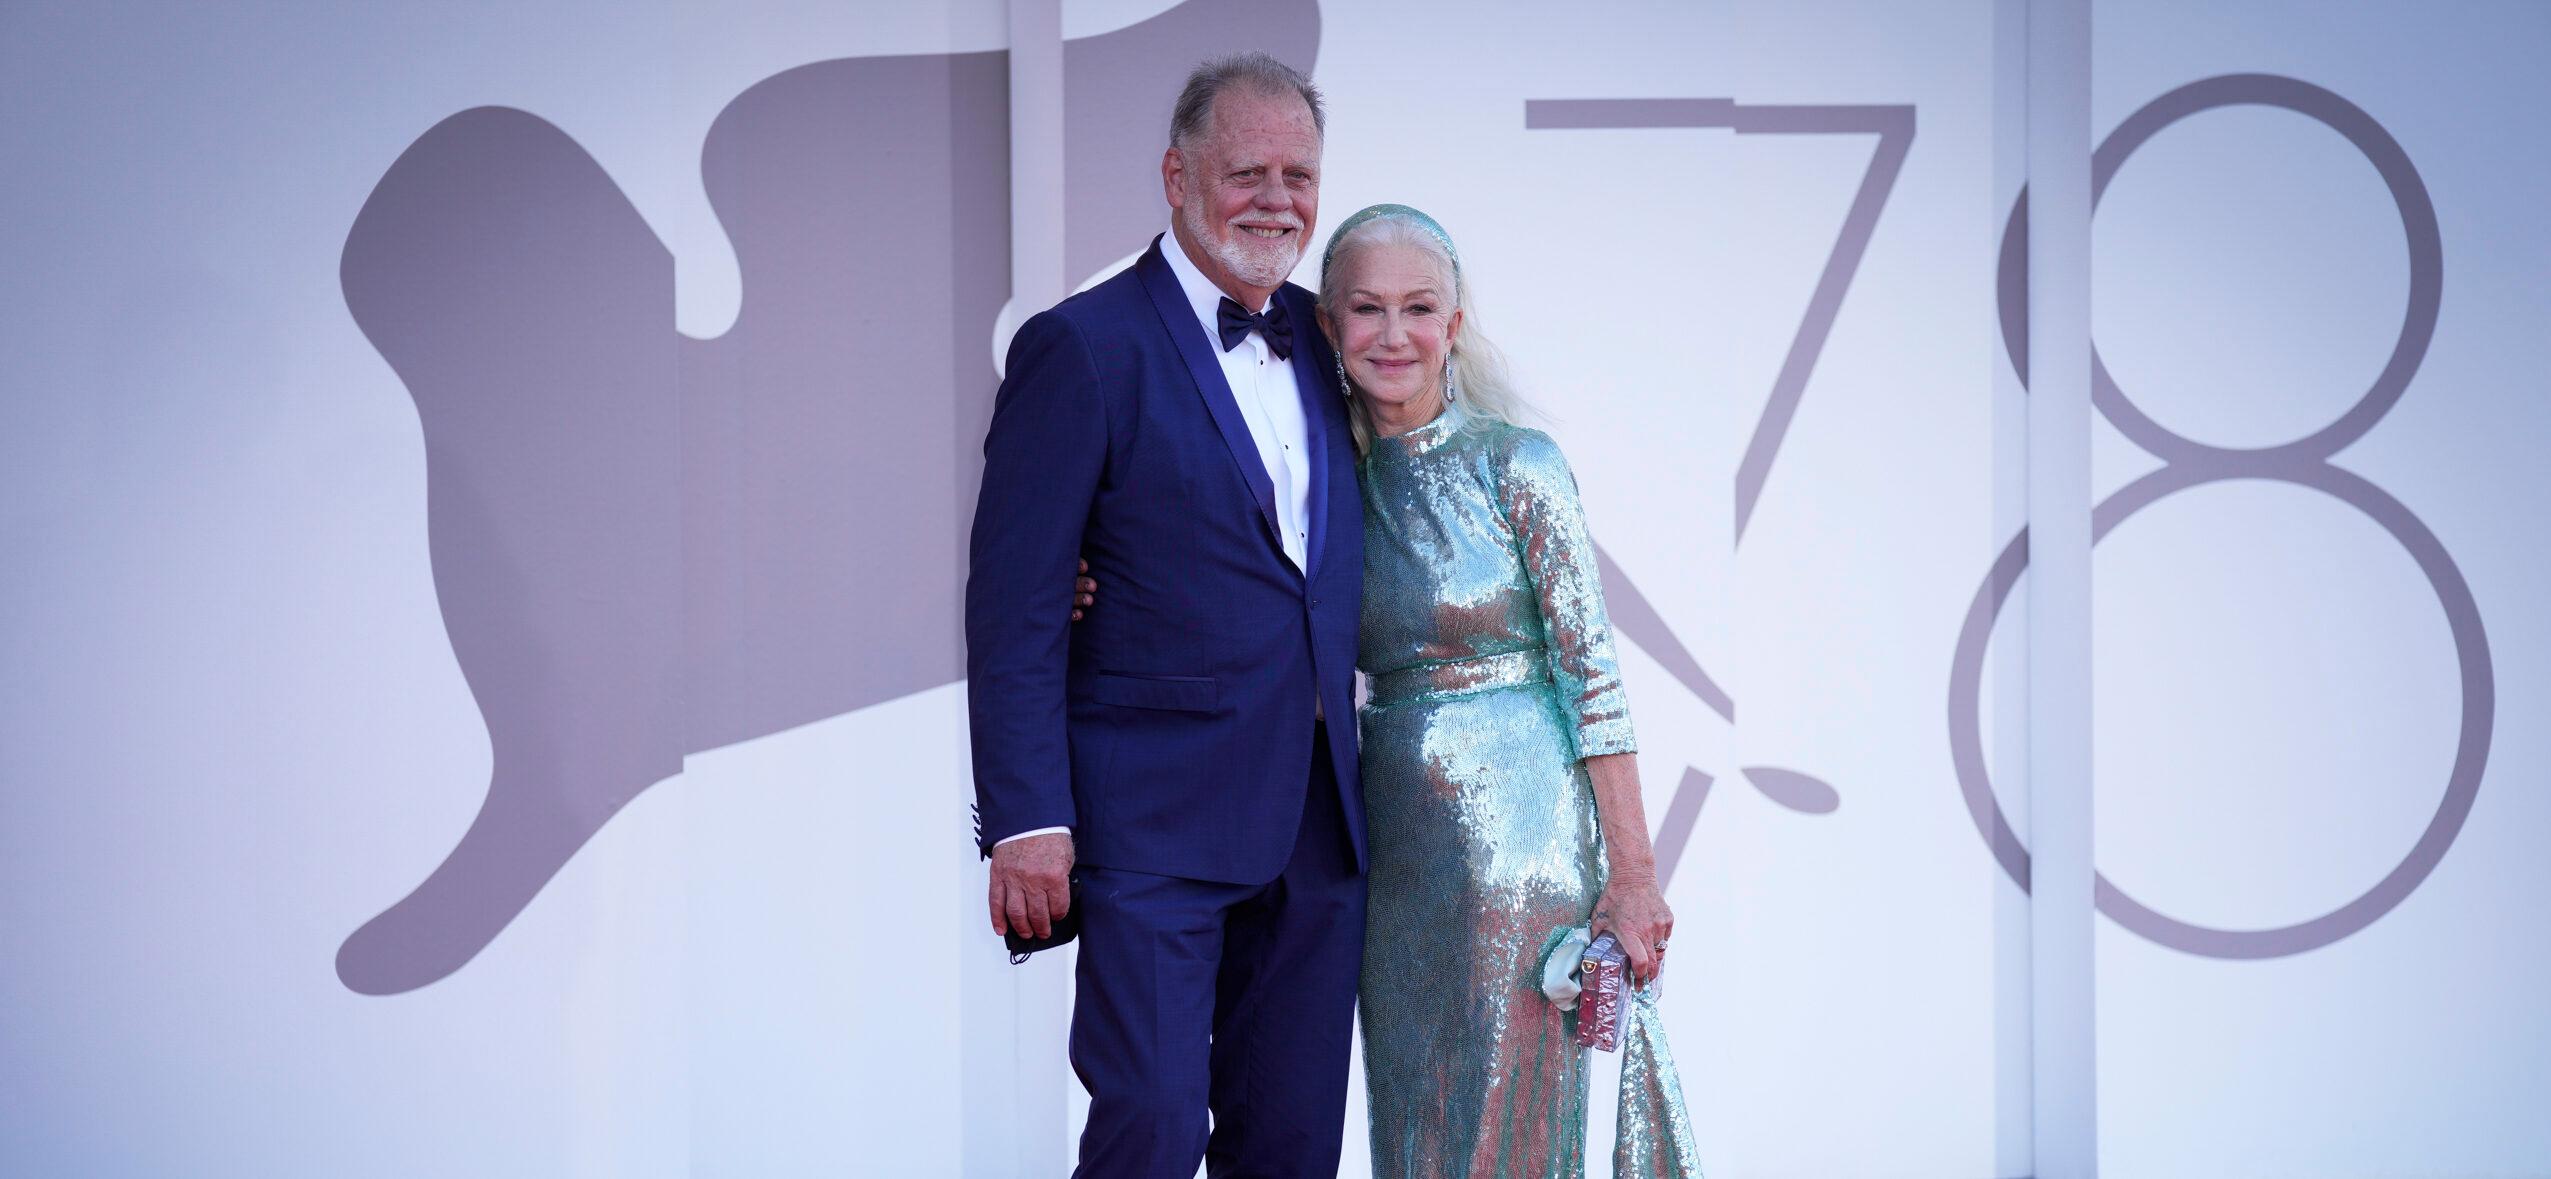 Helen Mirren Dishes On Her 25 Year Marriage To Taylor Hackford: ‘It’s Work’